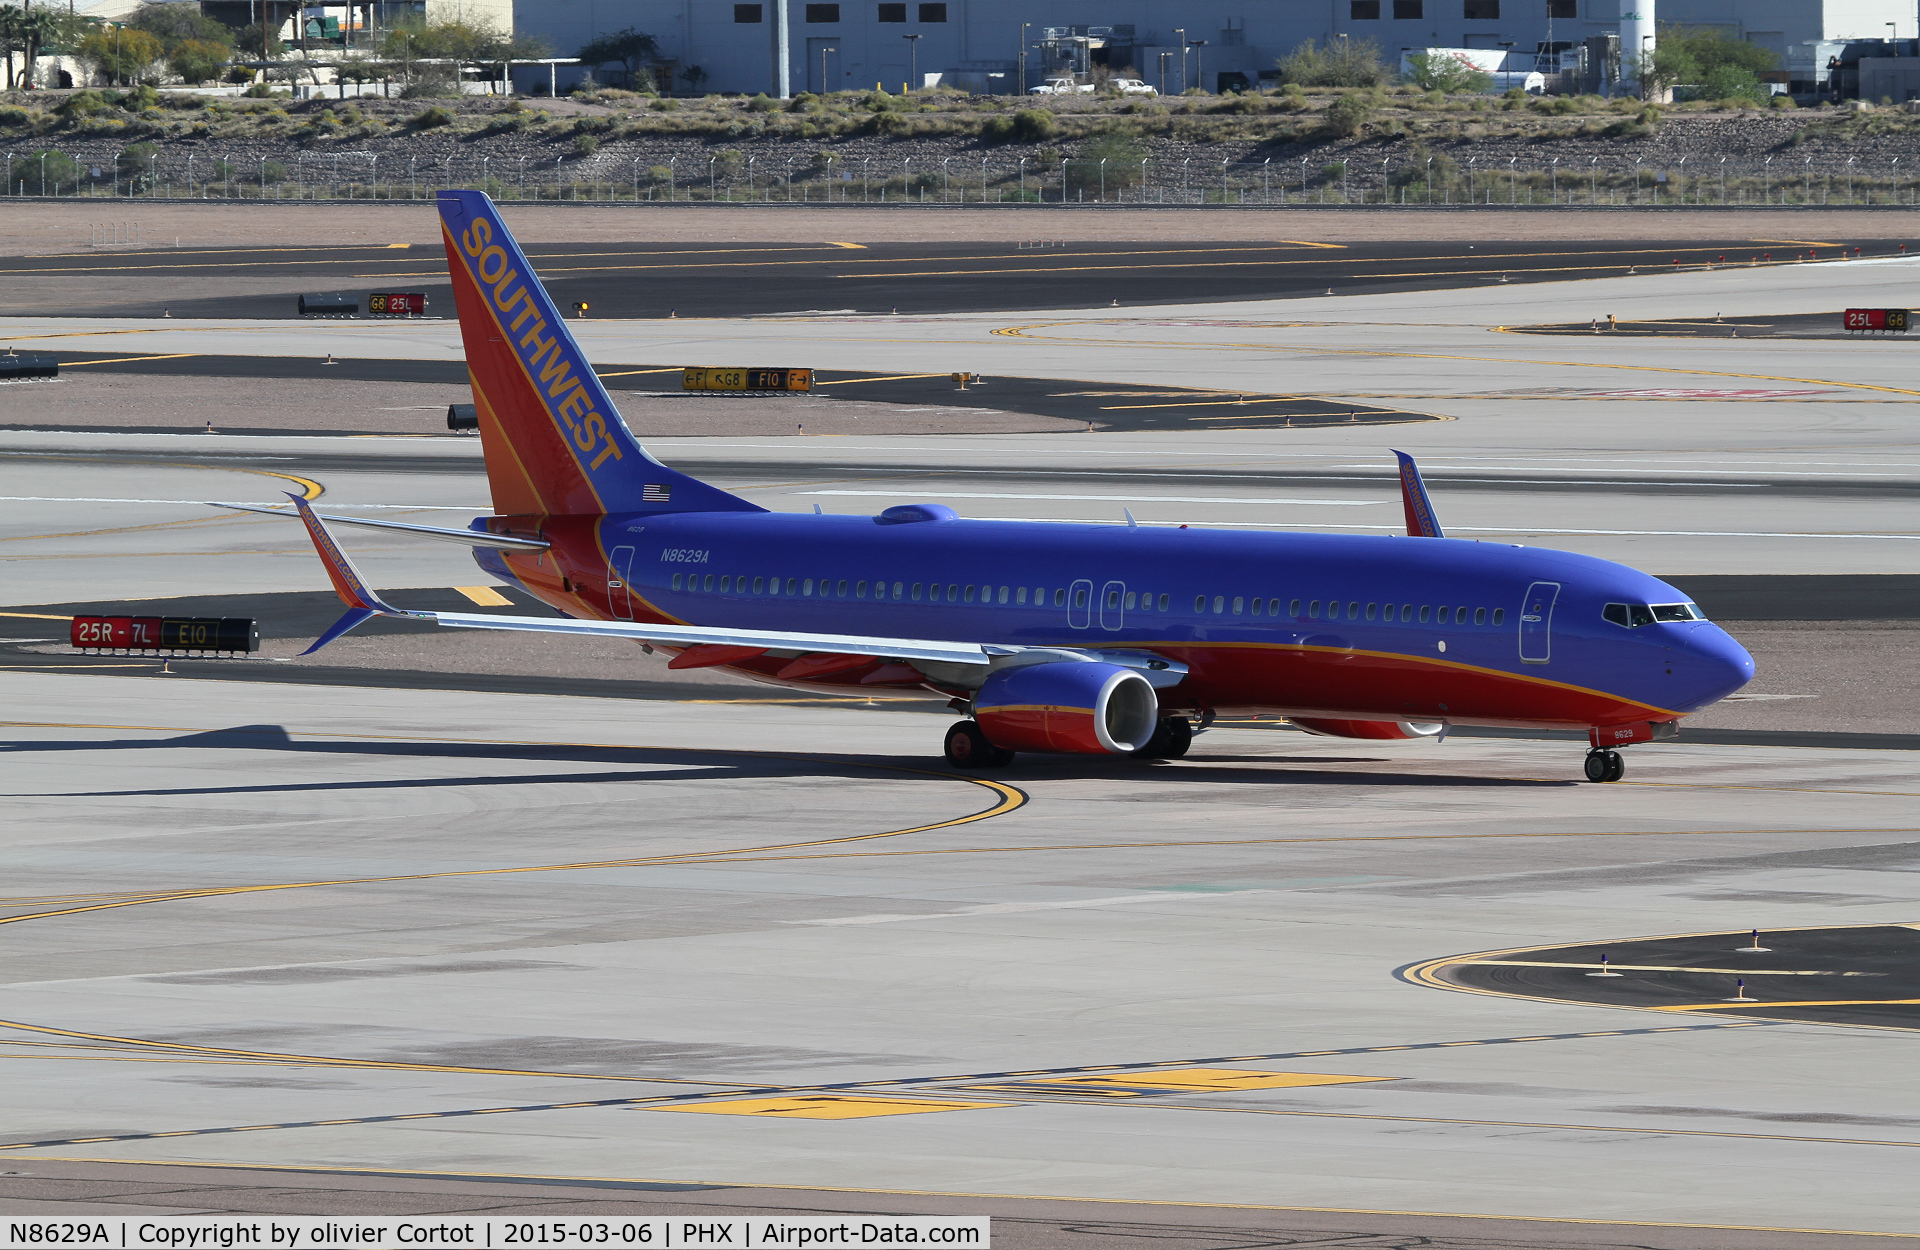 N8629A, 2014 Boeing 737-8H4 C/N 36897, about to leave Phoenix